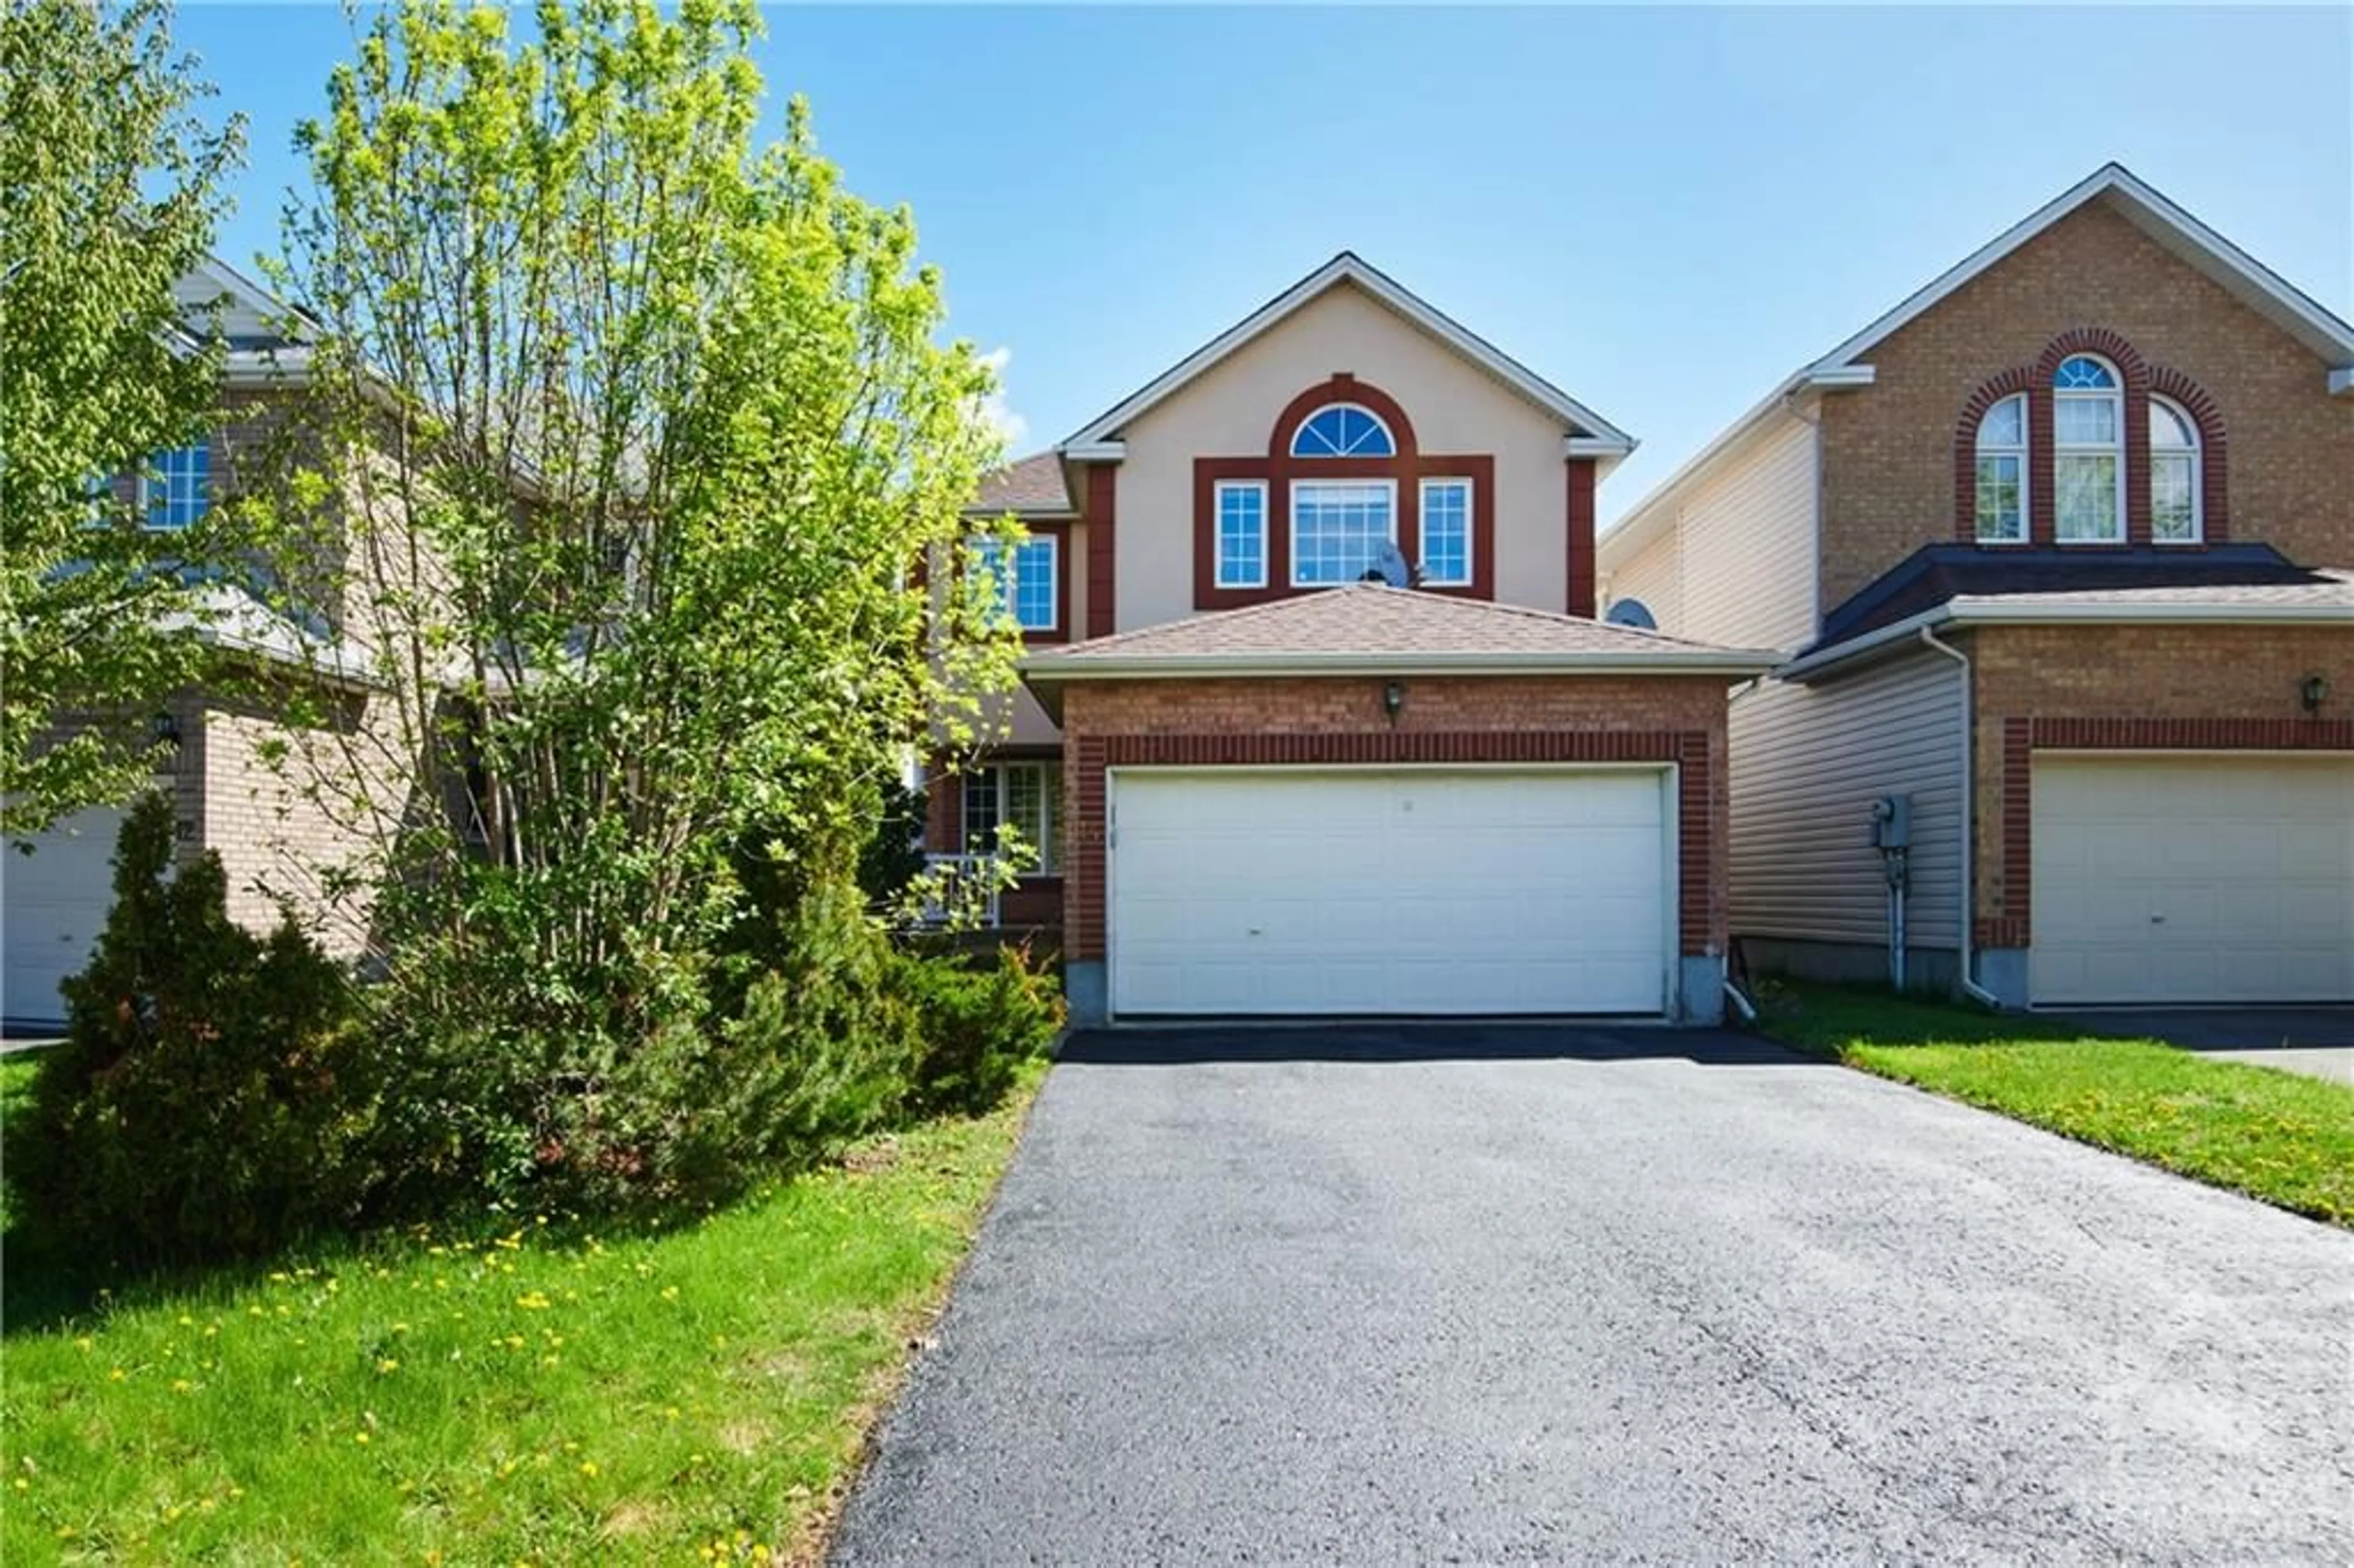 Frontside or backside of a home for 14 CRAIGHALL Cir, Ottawa Ontario K1T 4B4